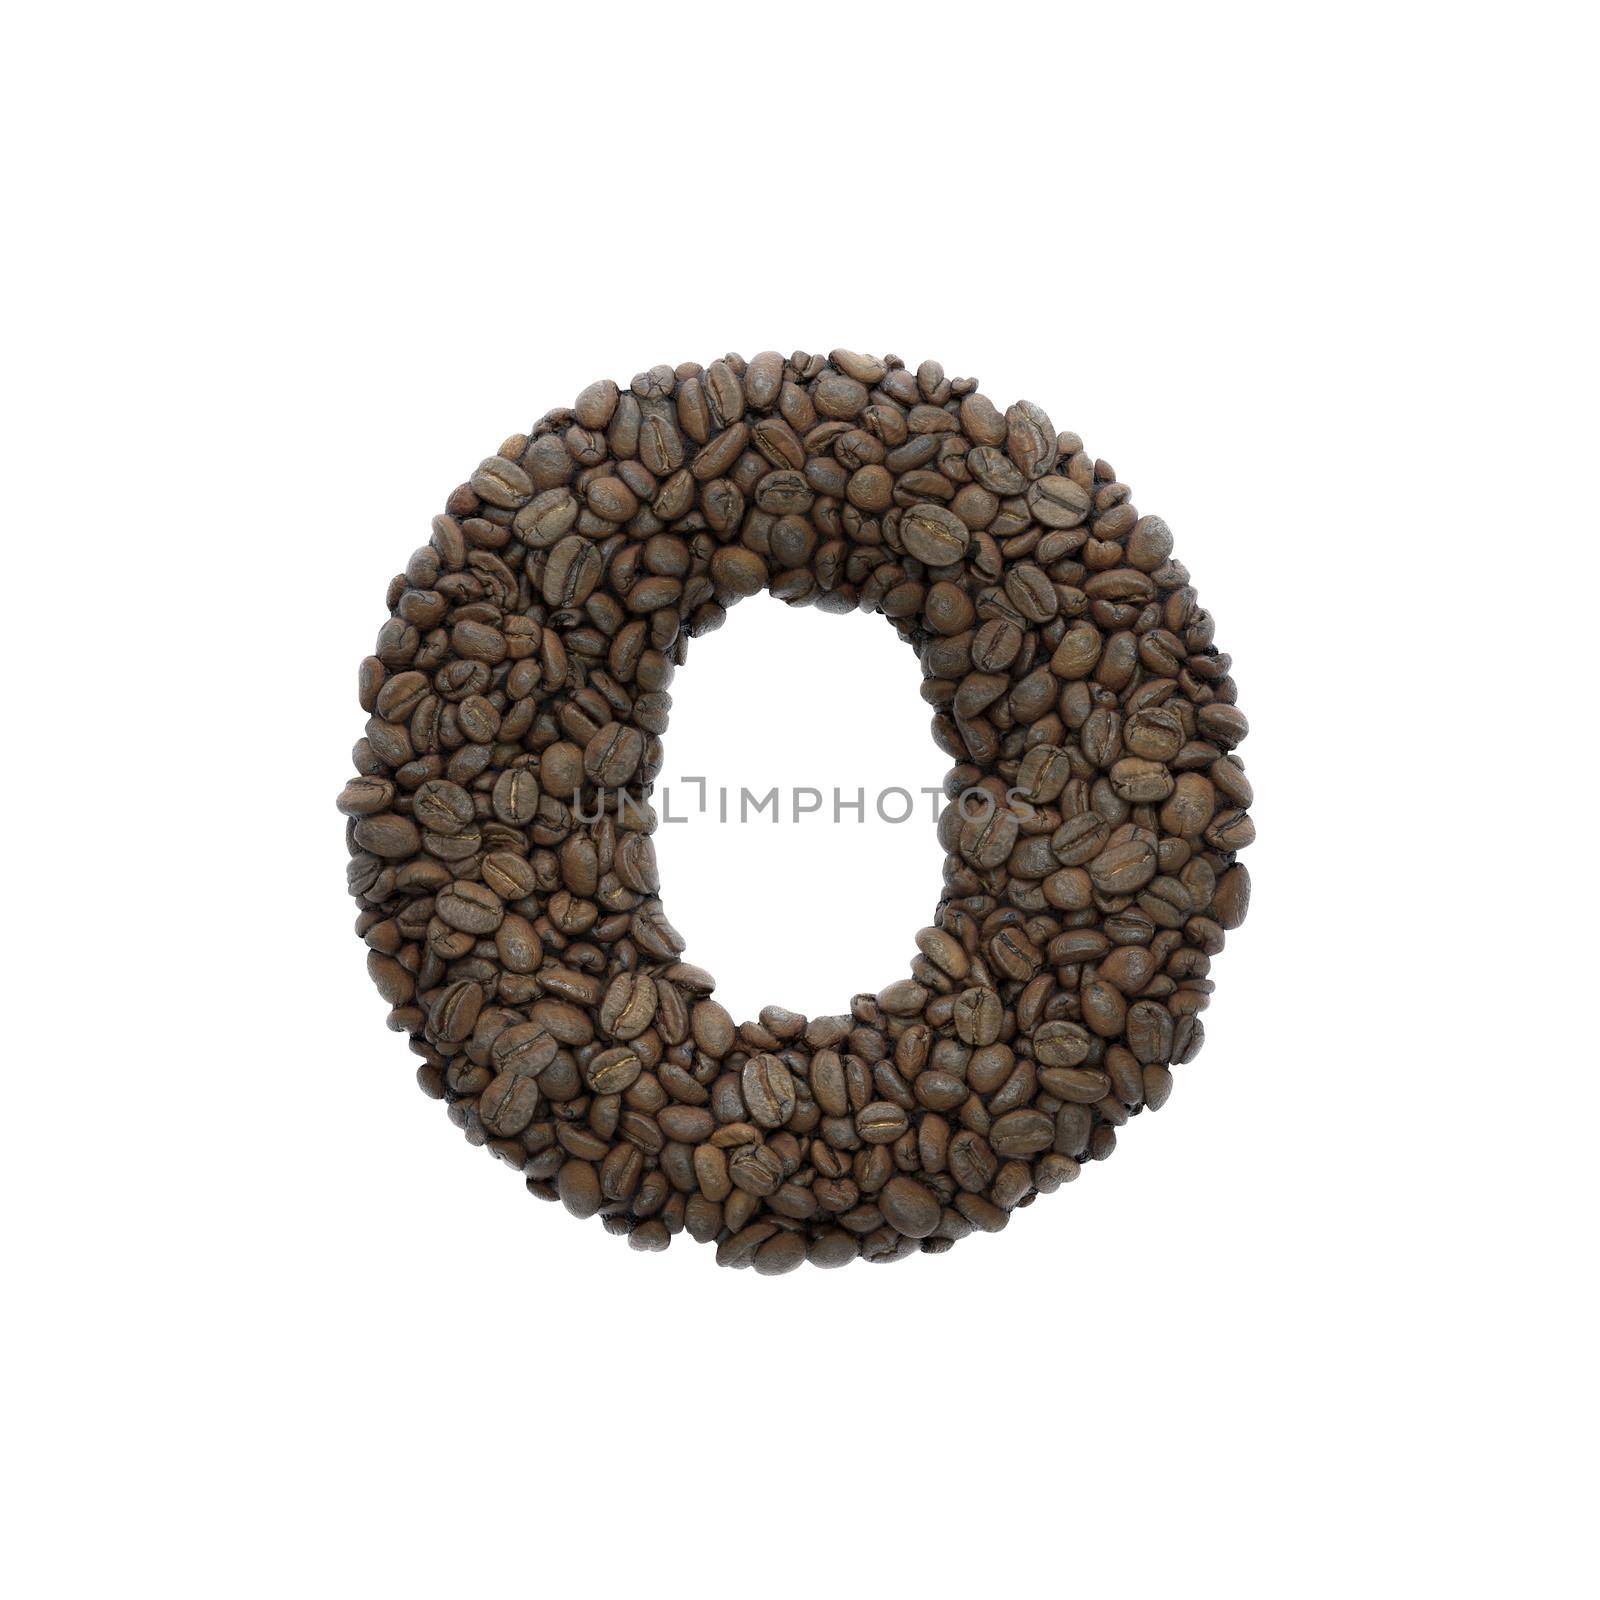 Coffee letter O - Lowercase 3d roasted beans font isolated on white background. This alphabet is perfect for creative illustrations related but not limited to Coffee, energy, insomnia...